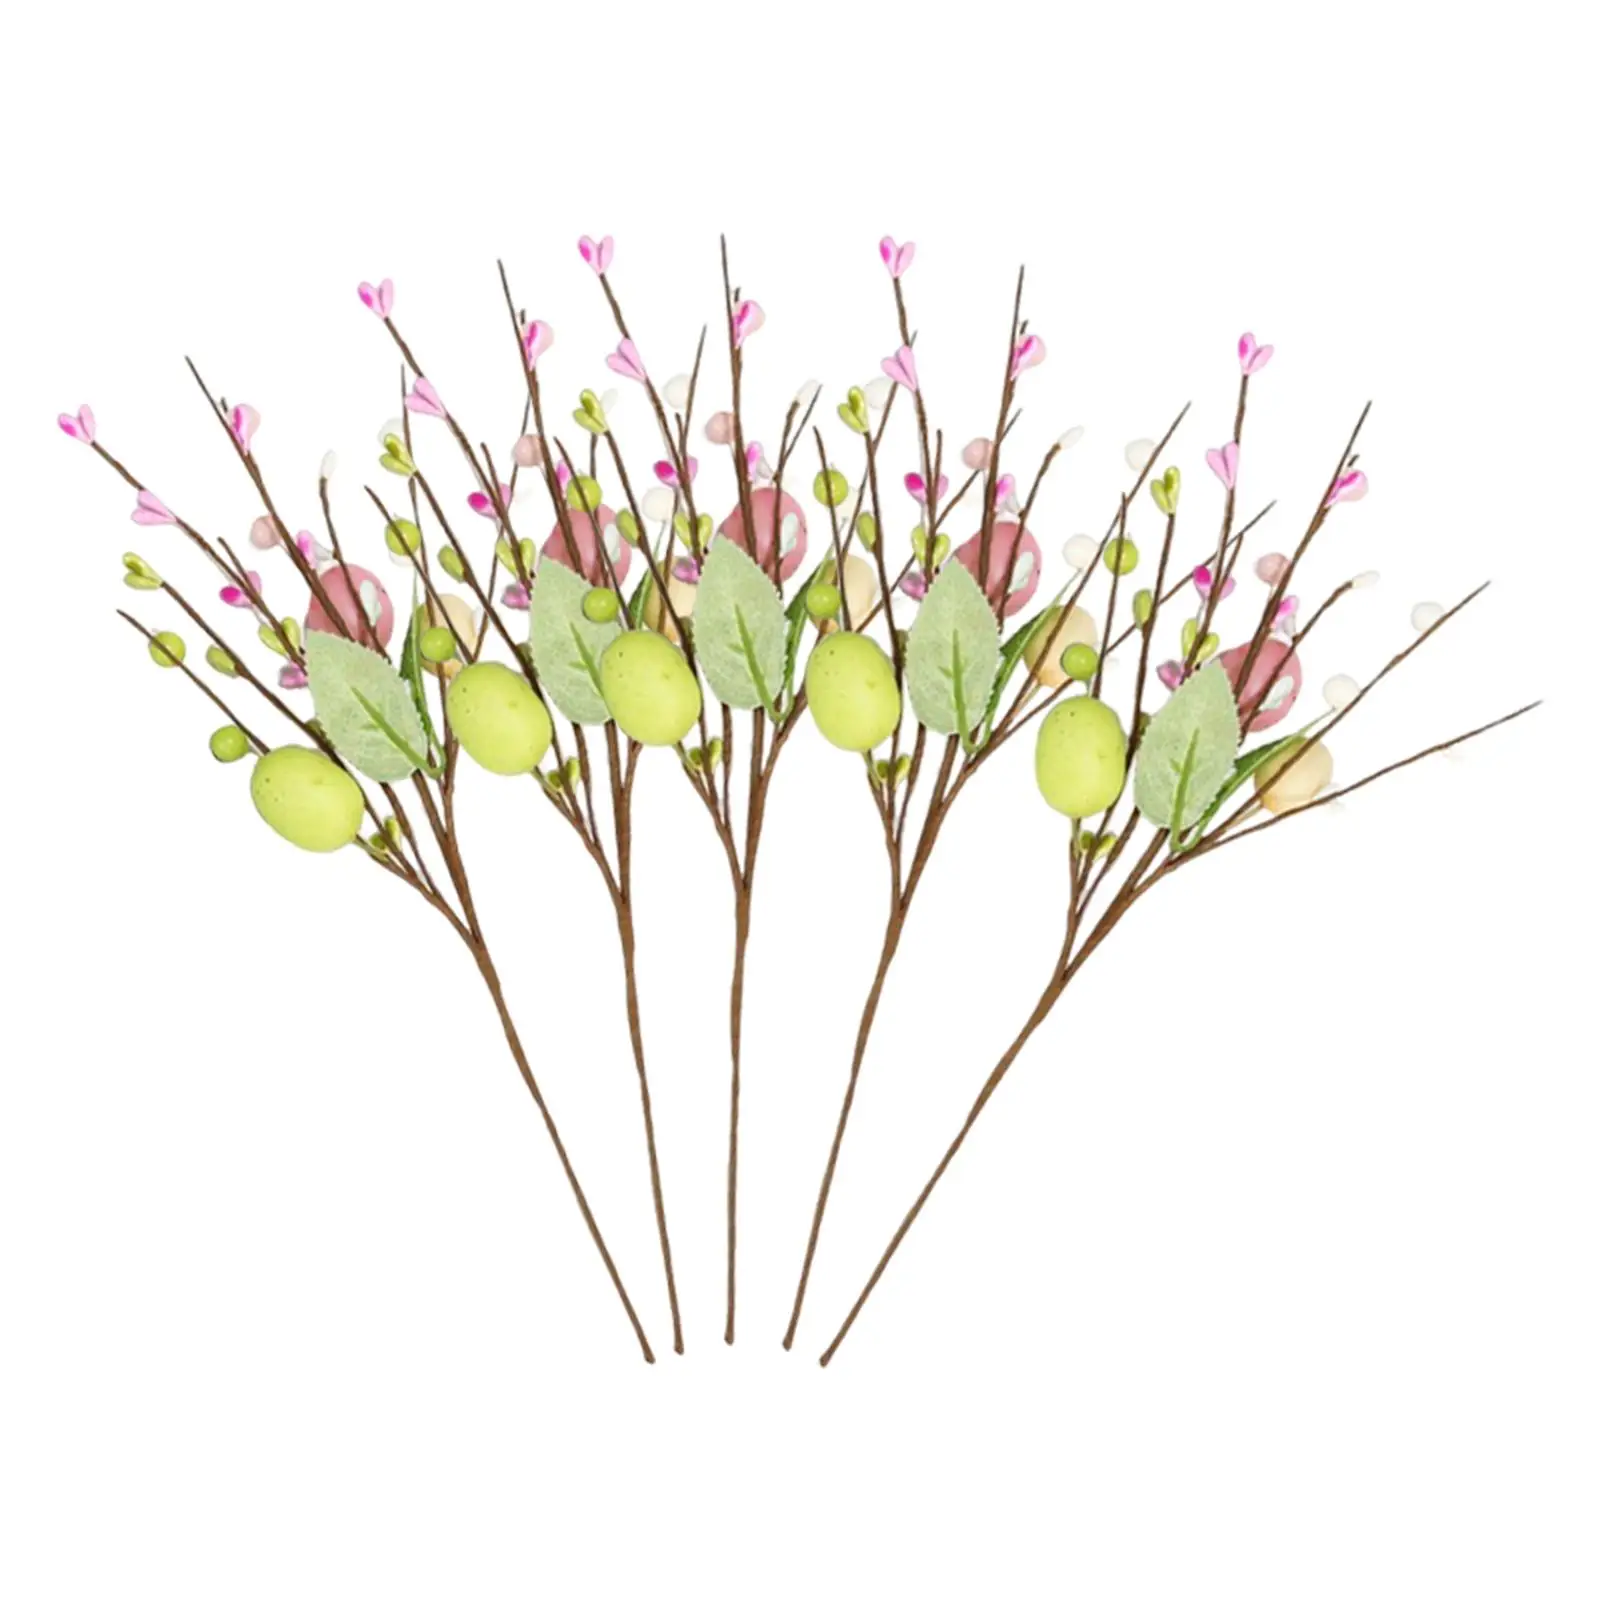 5 Pieces Spring Artificial Easter Stems Arrangement Farmhouse Wall Hanging